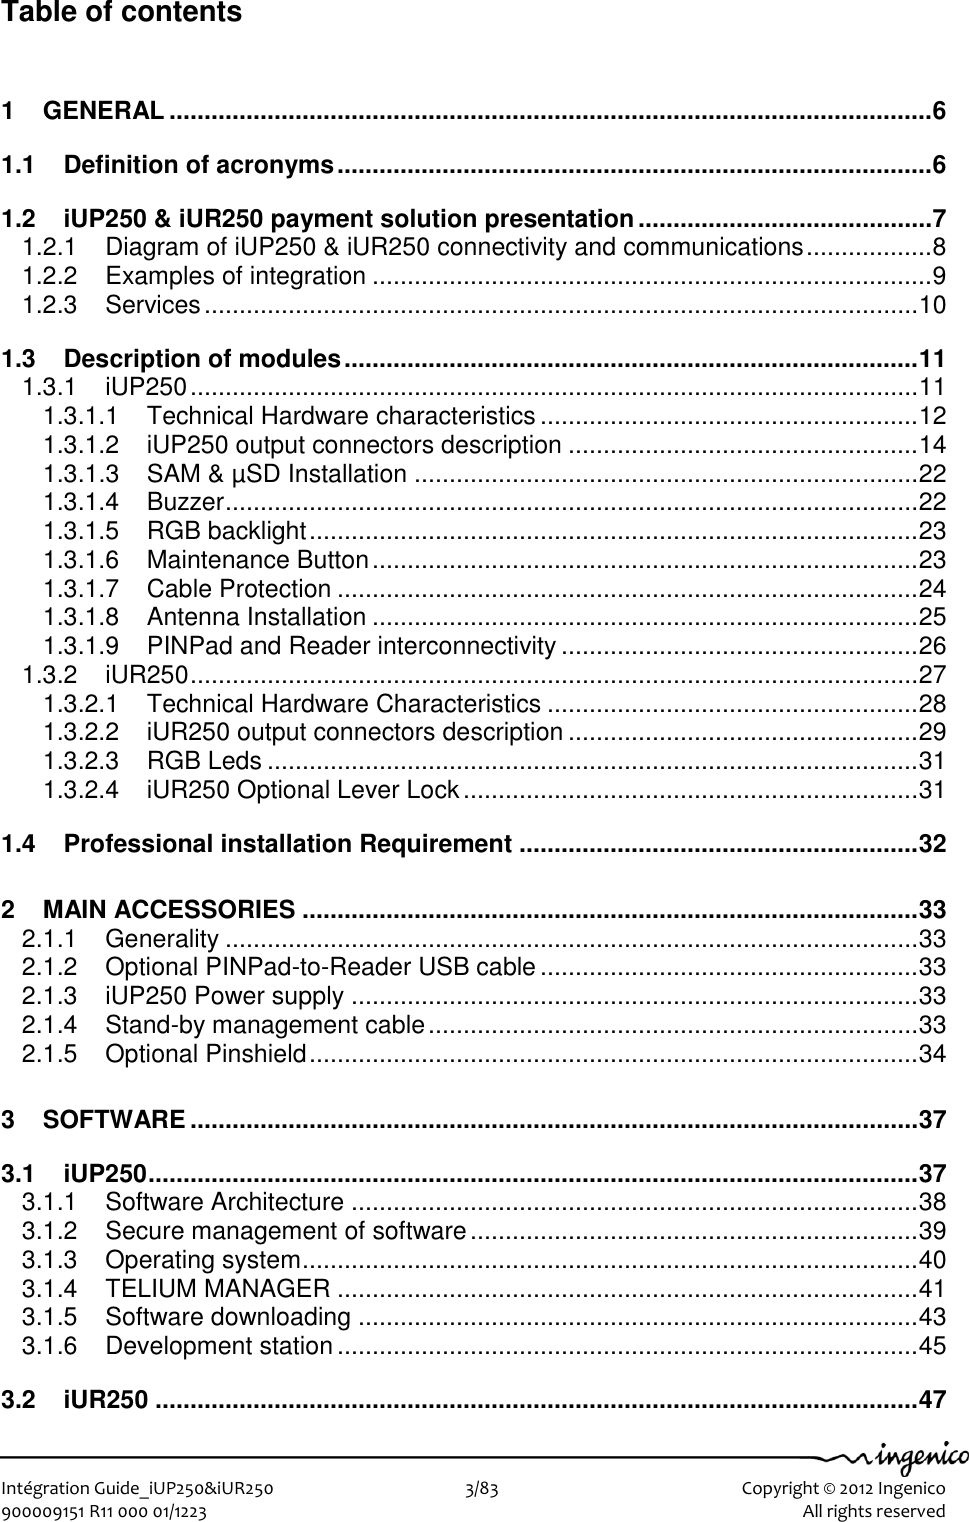   Intégration Guide_iUP250&amp;iUR250                        3/83    Copyright © 2012 Ingenico 900009151 R11 000 01/1223      All rights reserved   Table of contents 1 GENERAL ............................................................................................................. 6 1.1 Definition of acronyms ..................................................................................... 6 1.2 iUP250 &amp; iUR250 payment solution presentation .......................................... 7 1.2.1 Diagram of iUP250 &amp; iUR250 connectivity and communications .................. 8 1.2.2 Examples of integration ................................................................................ 9 1.2.3 Services ...................................................................................................... 10 1.3 Description of modules .................................................................................. 11 1.3.1 iUP250 ........................................................................................................ 11 1.3.1.1 Technical Hardware characteristics ...................................................... 12 1.3.1.2 iUP250 output connectors description .................................................. 14 1.3.1.3 SAM &amp; µSD Installation ........................................................................ 22 1.3.1.4 Buzzer ................................................................................................... 22 1.3.1.5 RGB backlight ....................................................................................... 23 1.3.1.6 Maintenance Button .............................................................................. 23 1.3.1.7 Cable Protection ................................................................................... 24 1.3.1.8 Antenna Installation .............................................................................. 25 1.3.1.9 PINPad and Reader interconnectivity ................................................... 26 1.3.2 iUR250 ........................................................................................................ 27 1.3.2.1 Technical Hardware Characteristics ..................................................... 28 1.3.2.2 iUR250 output connectors description .................................................. 29 1.3.2.3 RGB Leds ............................................................................................. 31 1.3.2.4 iUR250 Optional Lever Lock ................................................................. 31 1.4 Professional installation Requirement ......................................................... 32 2 MAIN ACCESSORIES ........................................................................................ 33 2.1.1 Generality ................................................................................................... 33 2.1.2 Optional PINPad-to-Reader USB cable ...................................................... 33 2.1.3 iUP250 Power supply ................................................................................. 33 2.1.4 Stand-by management cable ...................................................................... 33 2.1.5 Optional Pinshield ....................................................................................... 34 3 SOFTWARE ........................................................................................................ 37 3.1 iUP250 .............................................................................................................. 37 3.1.1 Software Architecture ................................................................................. 38 3.1.2 Secure management of software ................................................................ 39 3.1.3 Operating system ........................................................................................ 40 3.1.4 TELIUM MANAGER ................................................................................... 41 3.1.5 Software downloading ................................................................................ 43 3.1.6 Development station ................................................................................... 45 3.2 iUR250 ............................................................................................................. 47 